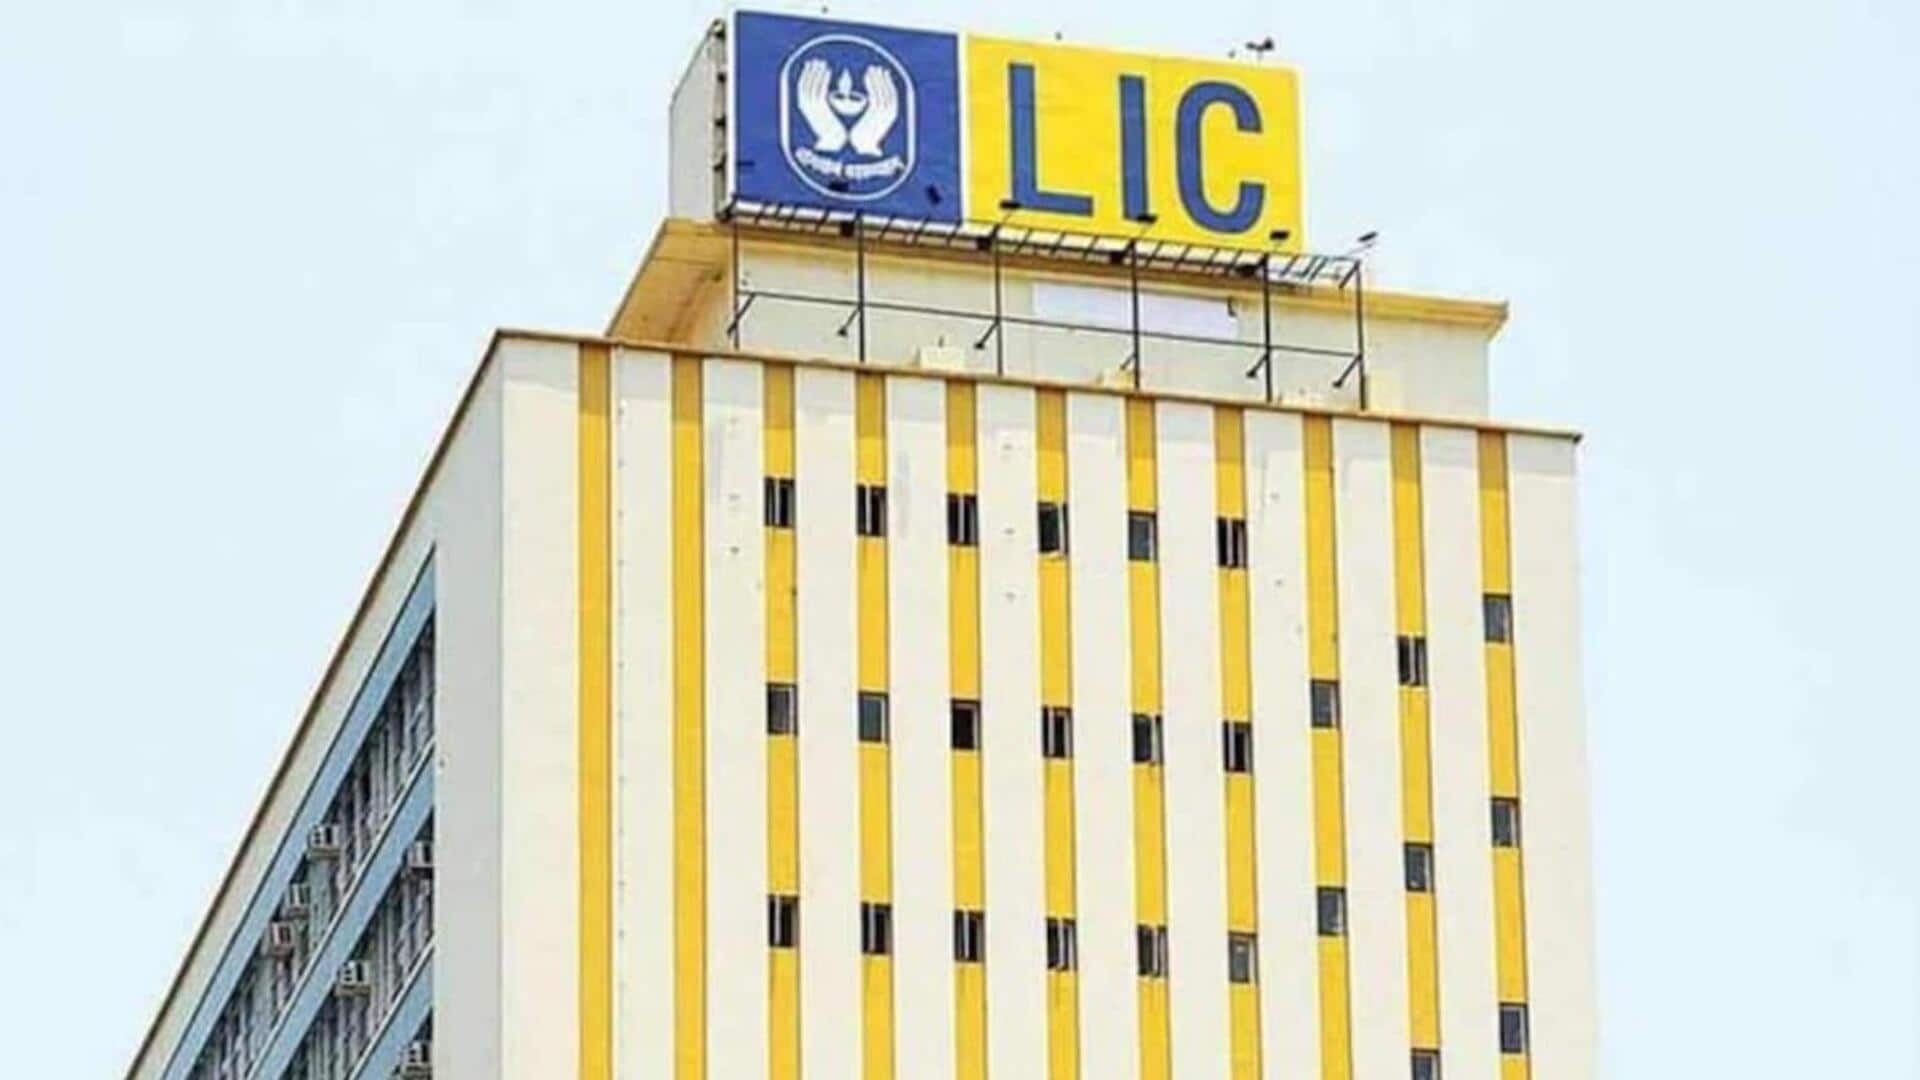 LIC shares rise 6% as year-on-year profit skyrockets 1,300%